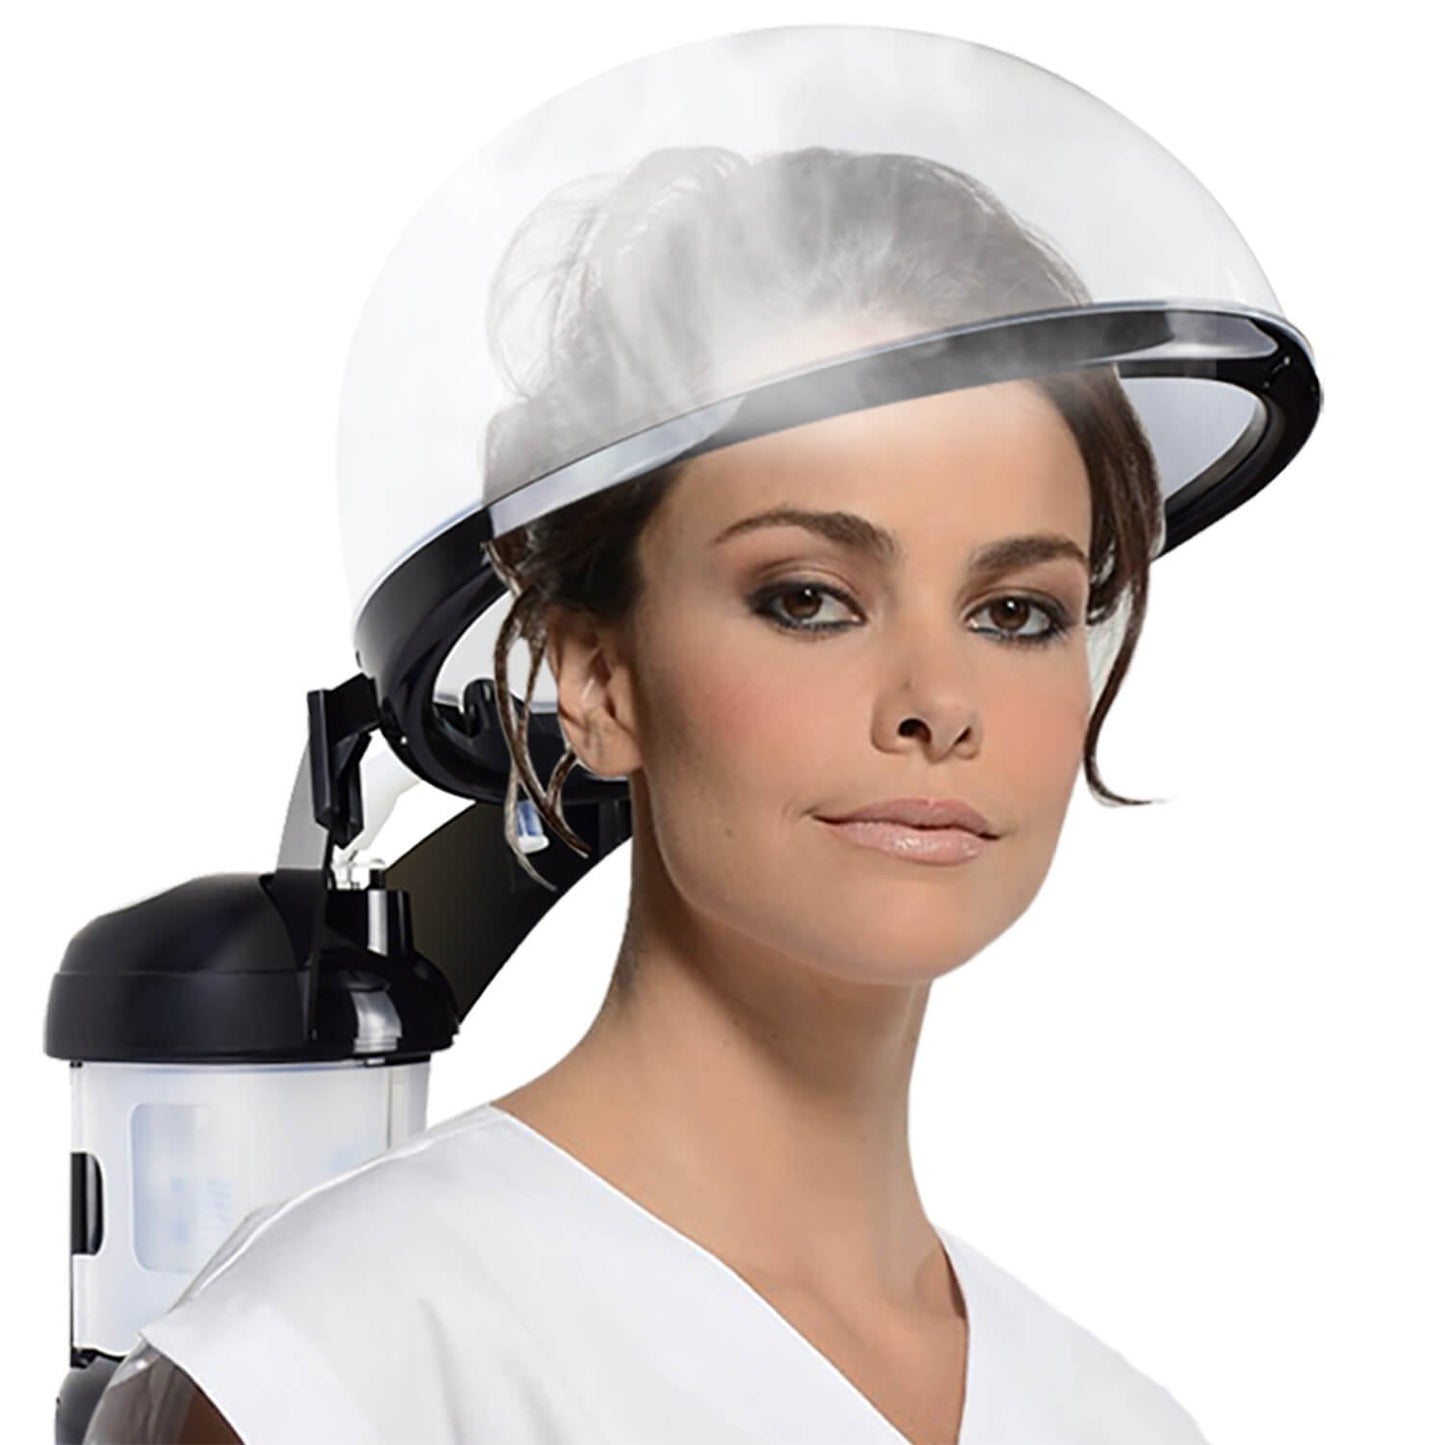 Hair Steamer Kingsteam 2 in 1 Ozone Facial Steamer, Design for Personal Care Use At Home or Salon